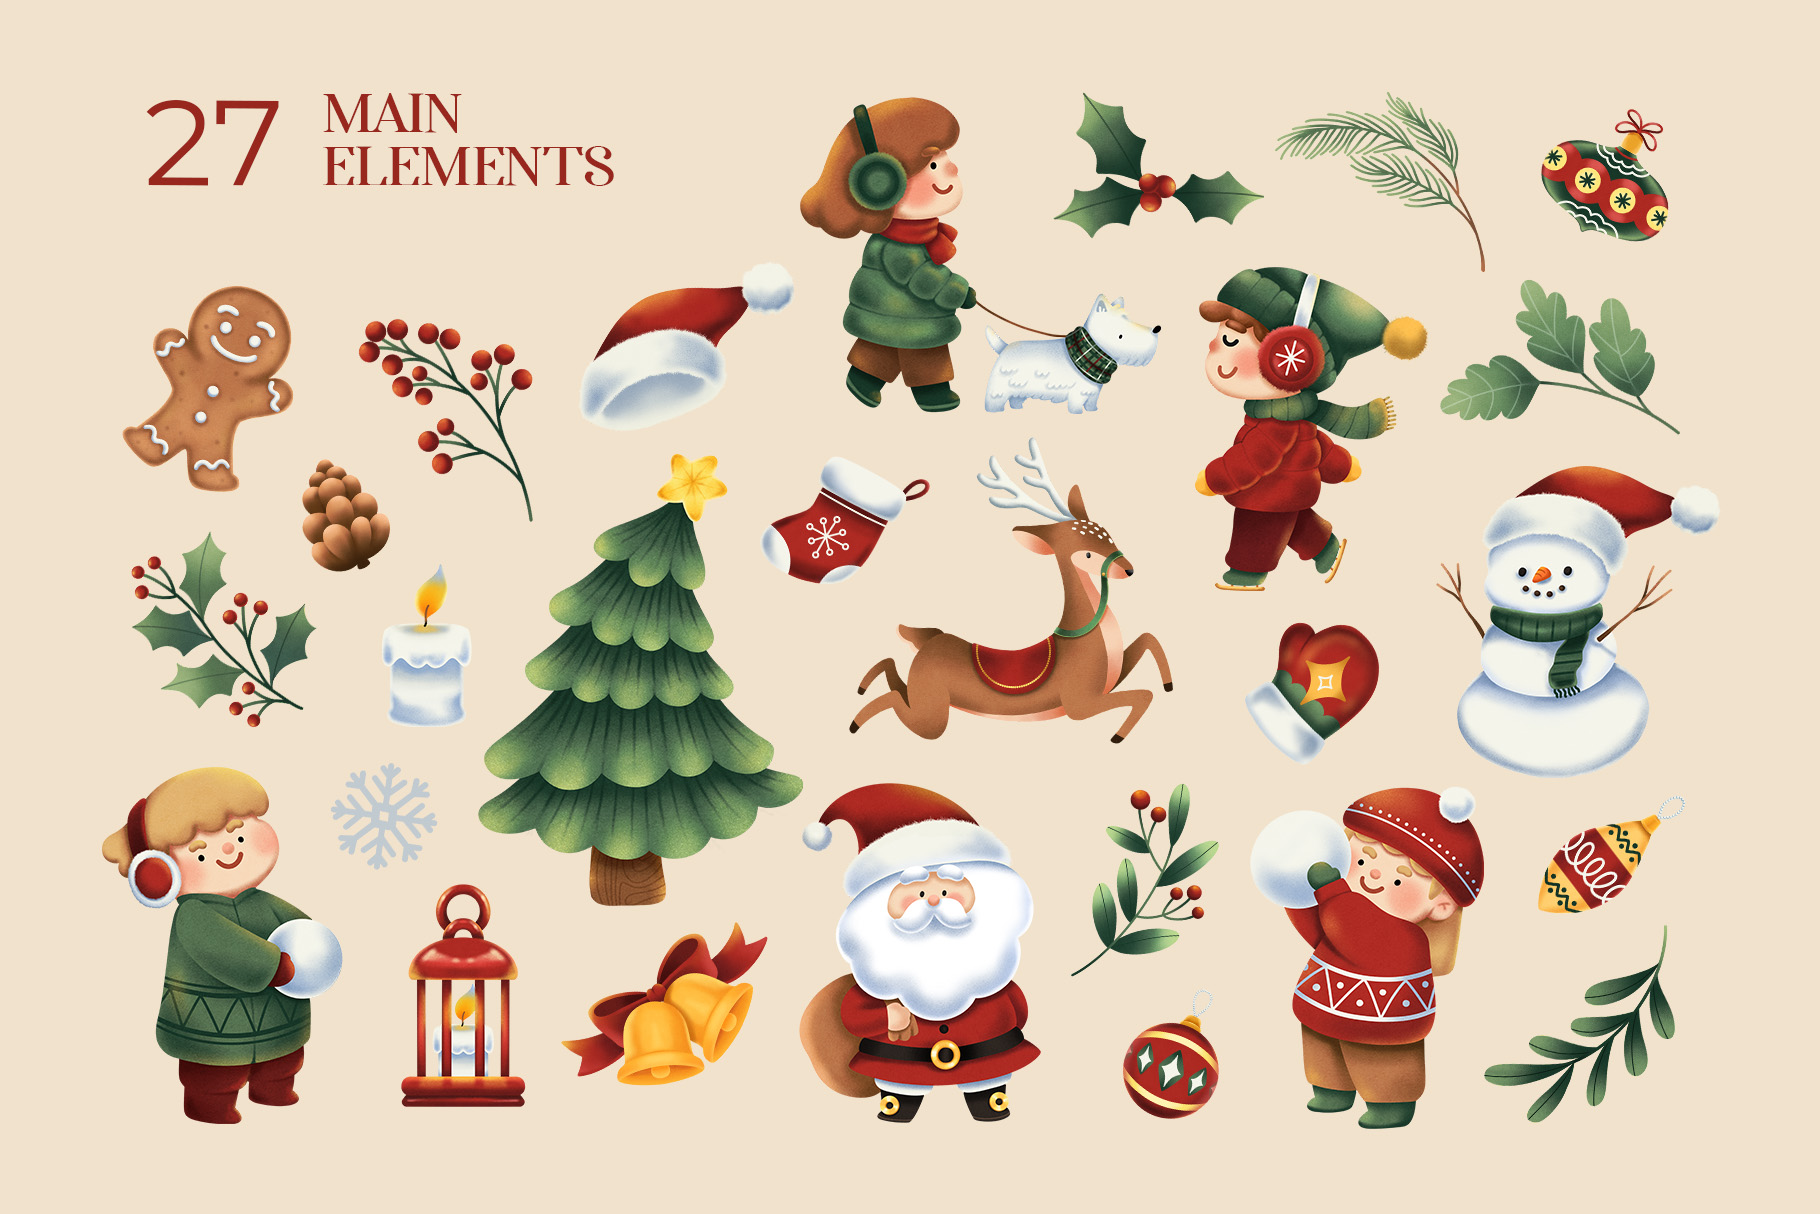 Christmas Graphics & Illustrations Pack (PSD, PNG, JPEG Format)